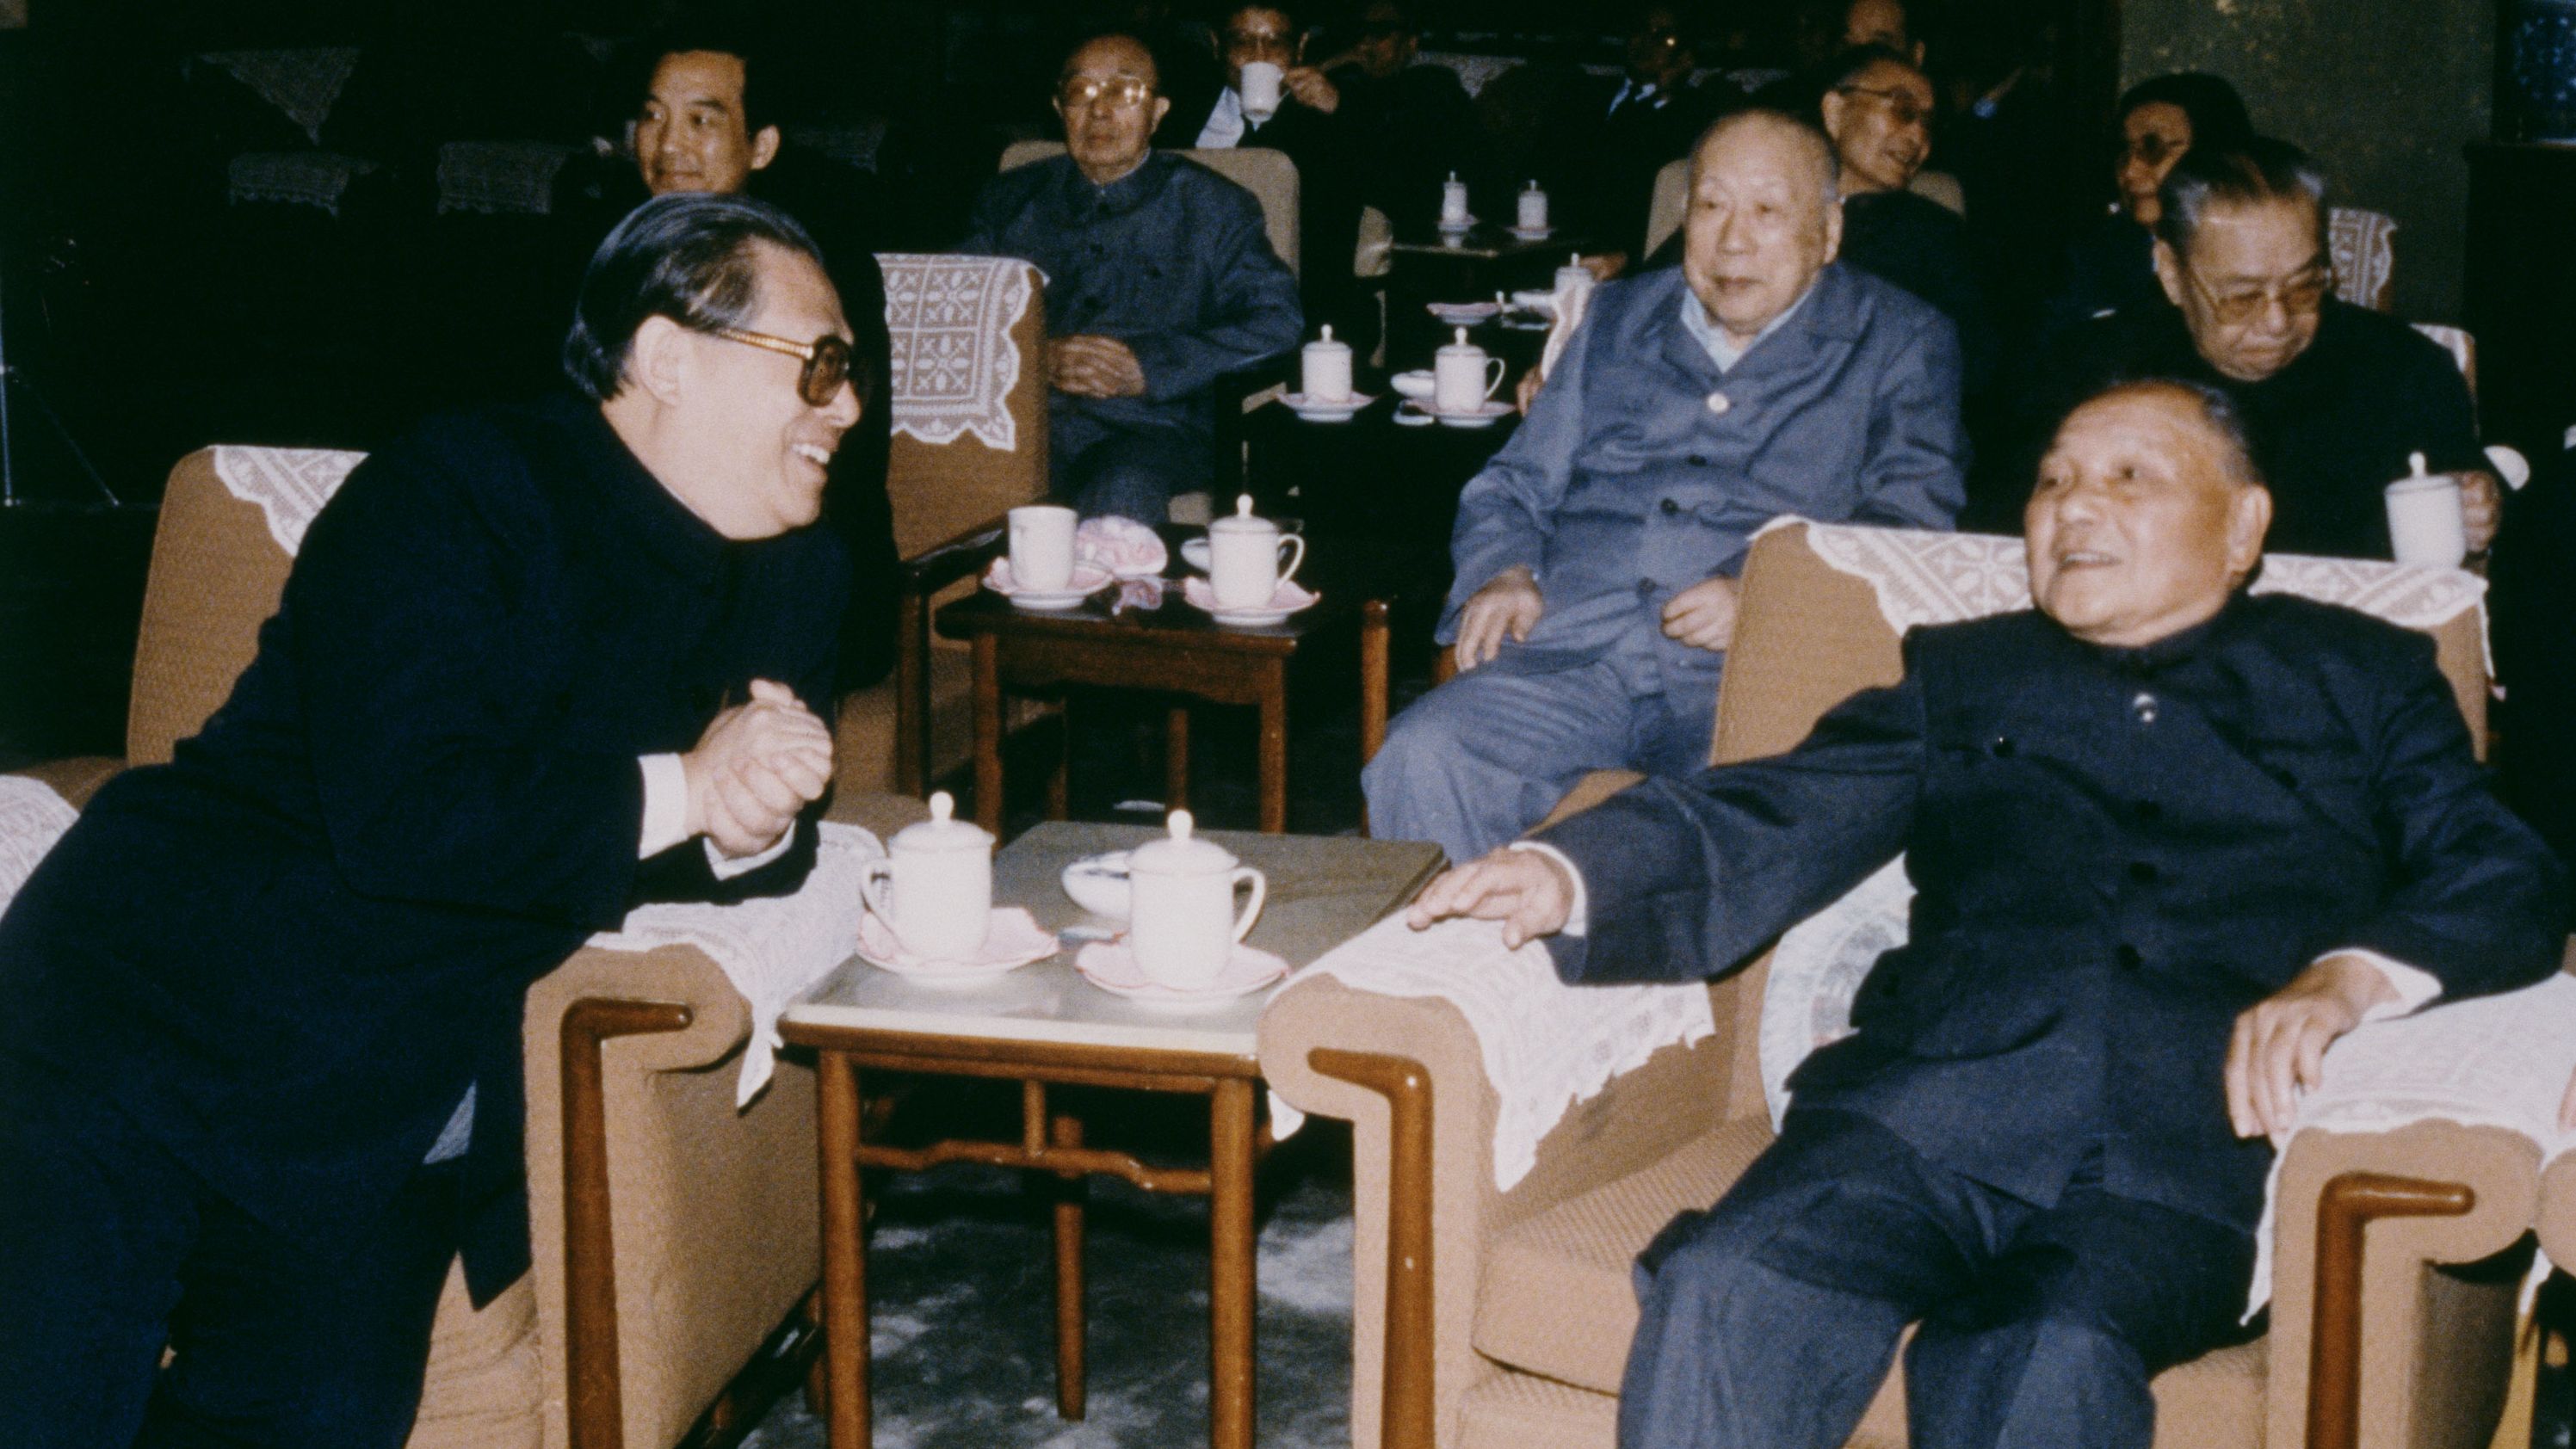 Deng, right, sits with Jiang Zemin, general secretary of the Chinese Communist Party, in 1989. Jiang became President in 1993 and served for a decade.